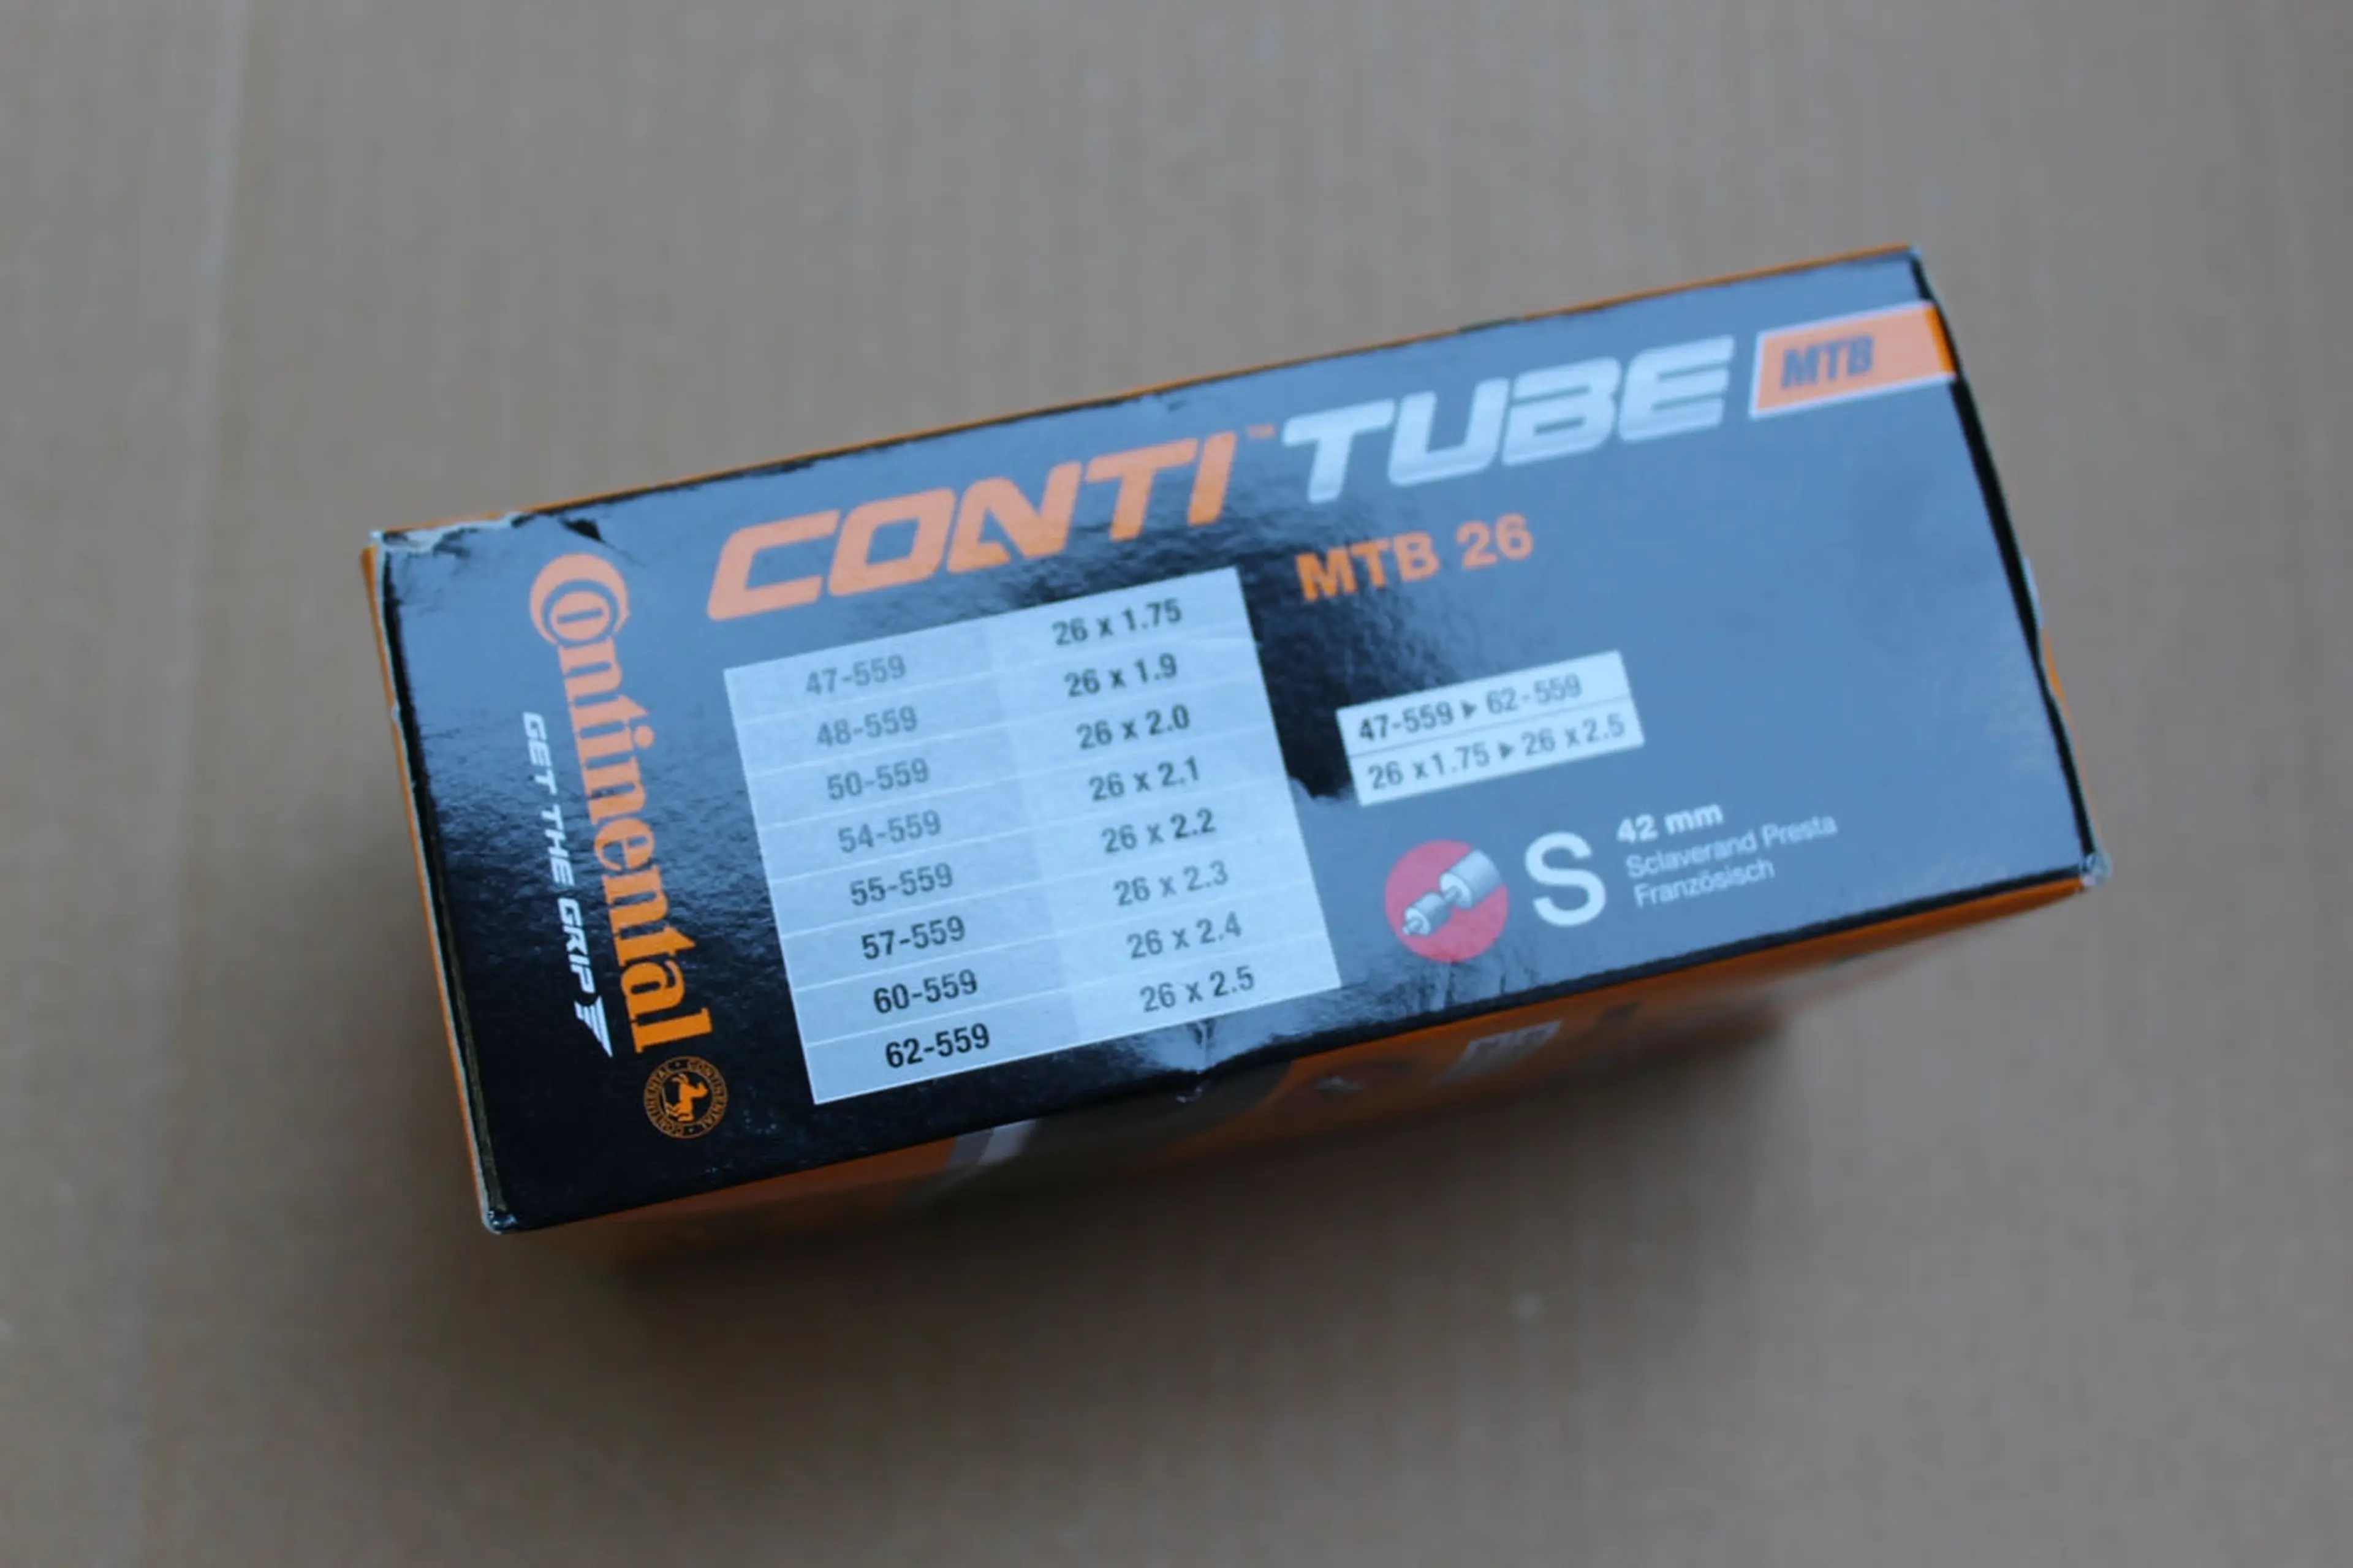 2. Continental Tube Wide 26x1.75-2.5 FV.